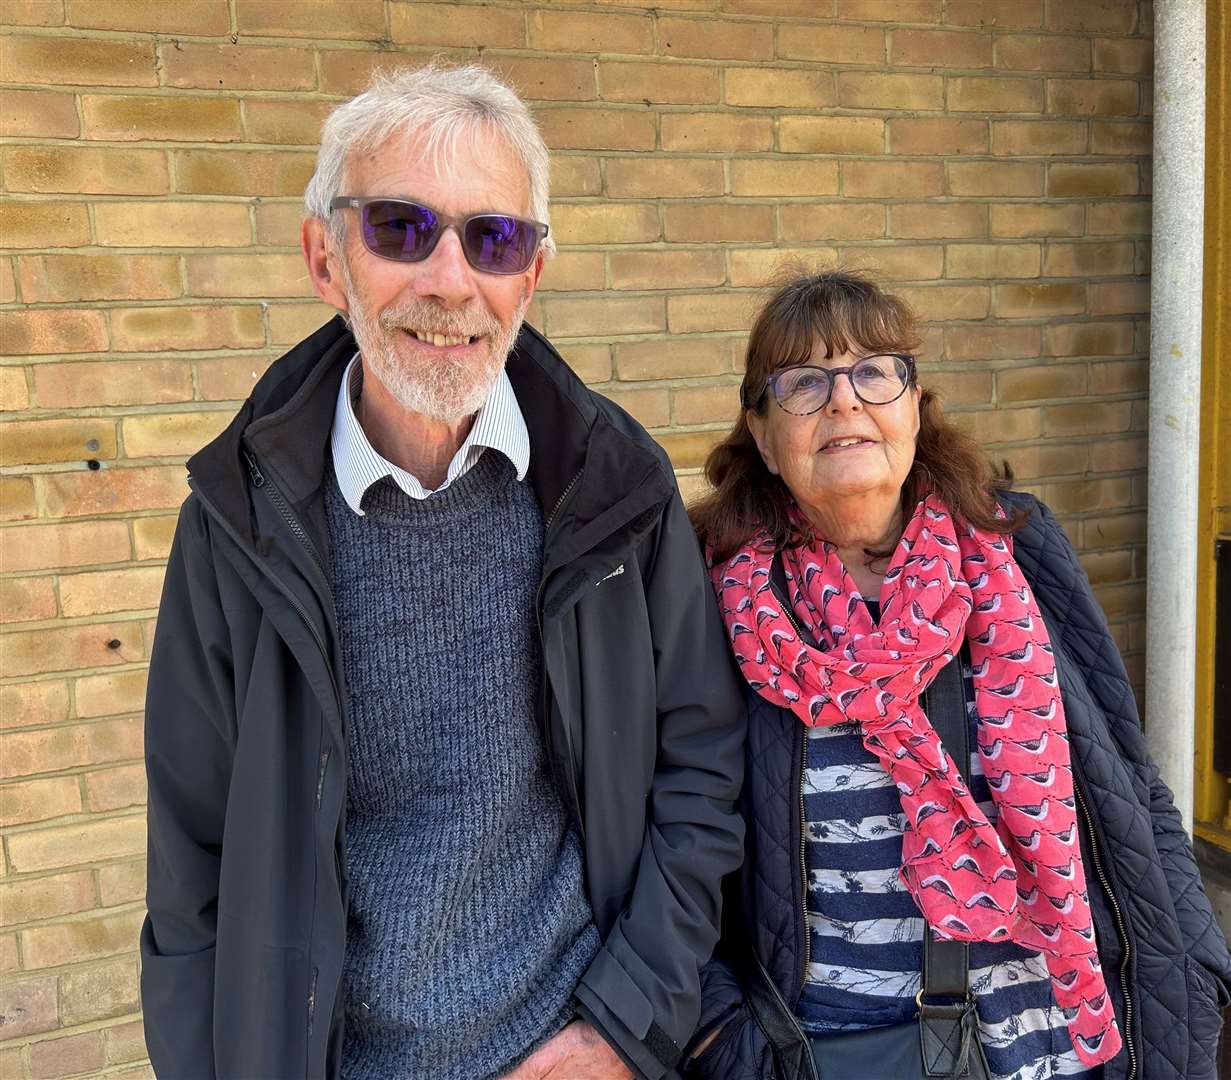 Alistair and Mary Noble at Sturry Park and Ride in Canterbury